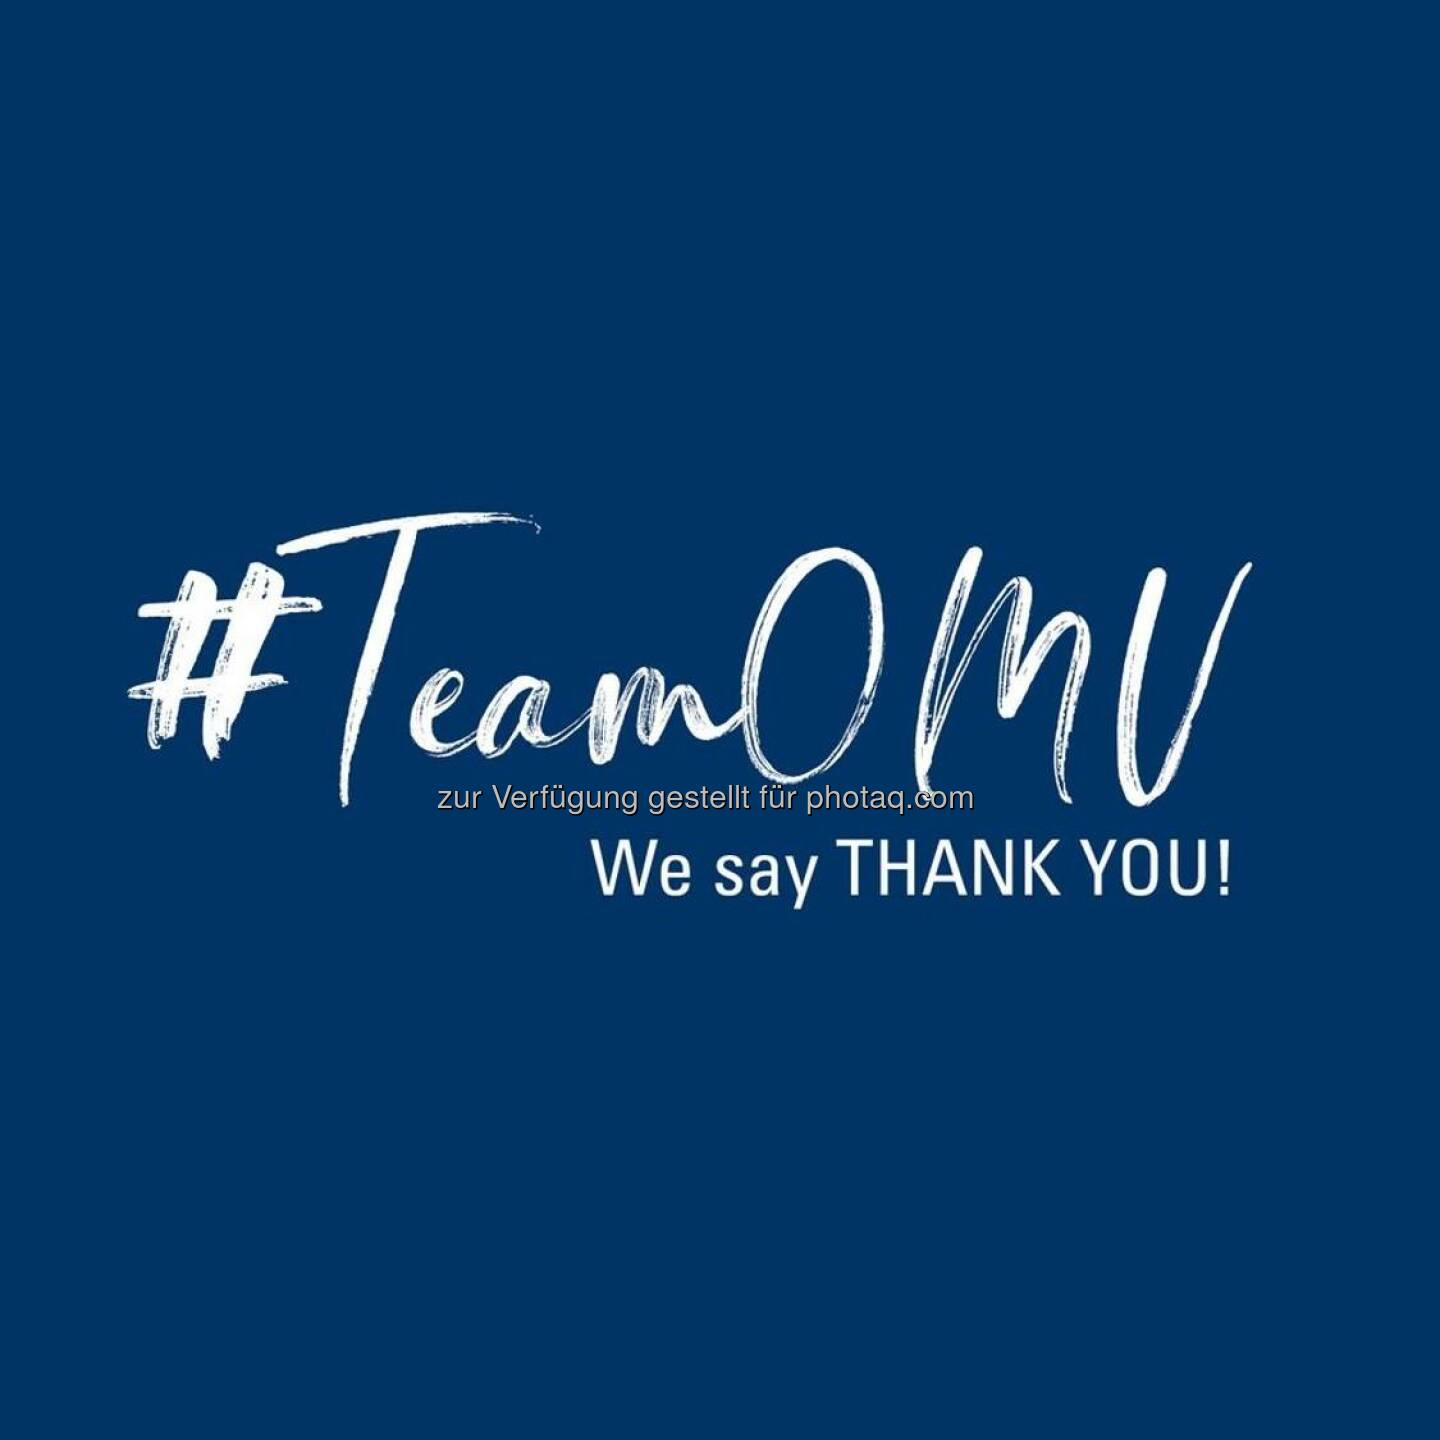 Today it is time to say a loud and clear thank you to the OMV employees. For everything they are doing in these days. It is impressive and makes us proud to see the high commitment and professionalism of everyone at OMV, working together. A special mention to our colleagues working in the field, in the refineries, in gas storage, in trading, in sales, in logistics, at our filling stations, in IT, and in the Emergency Management Team to ensure security of supply. Thank you! #TeamOMV #COVID19  Source: http://facebook.com/OMV